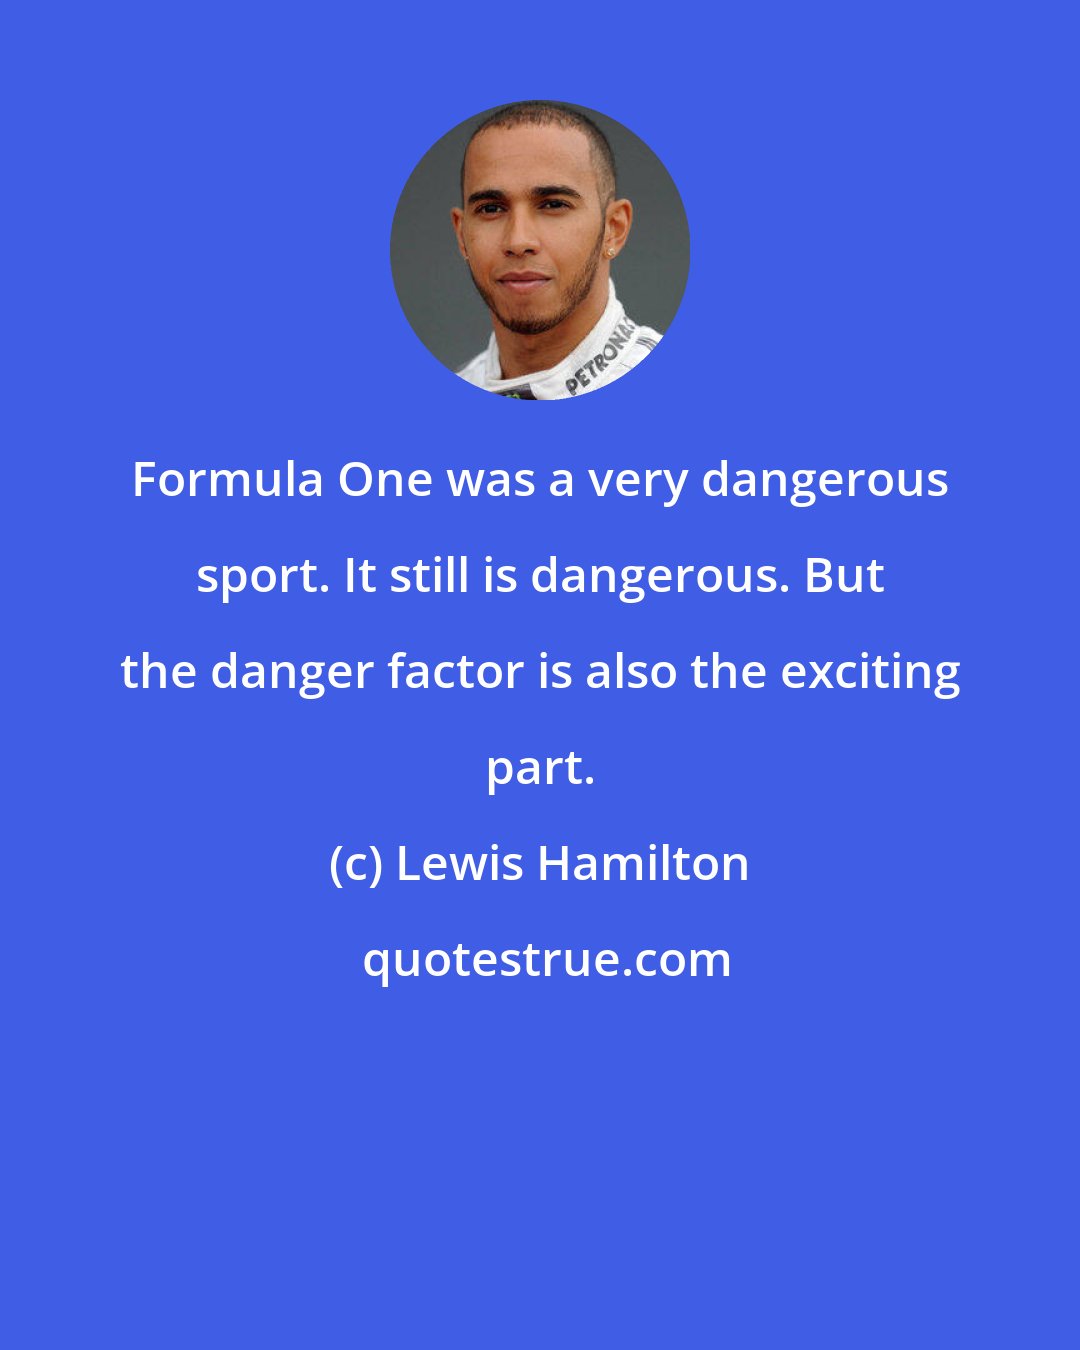 Lewis Hamilton: Formula One was a very dangerous sport. It still is dangerous. But the danger factor is also the exciting part.